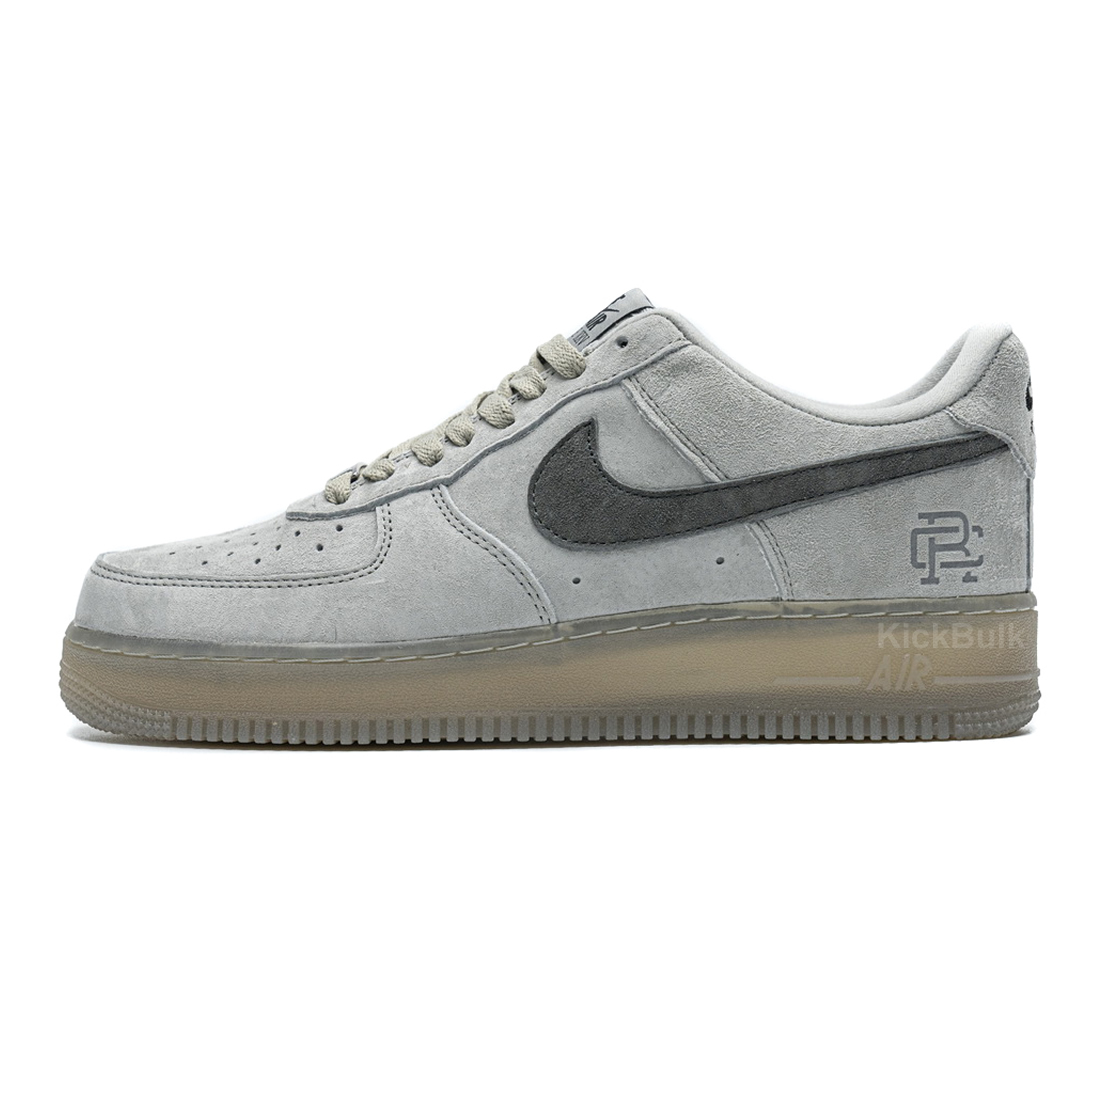 Reigning Champ Nike Air Force 1 Low Suede Light Grey Aa1117 118 1 - www.kickbulk.org